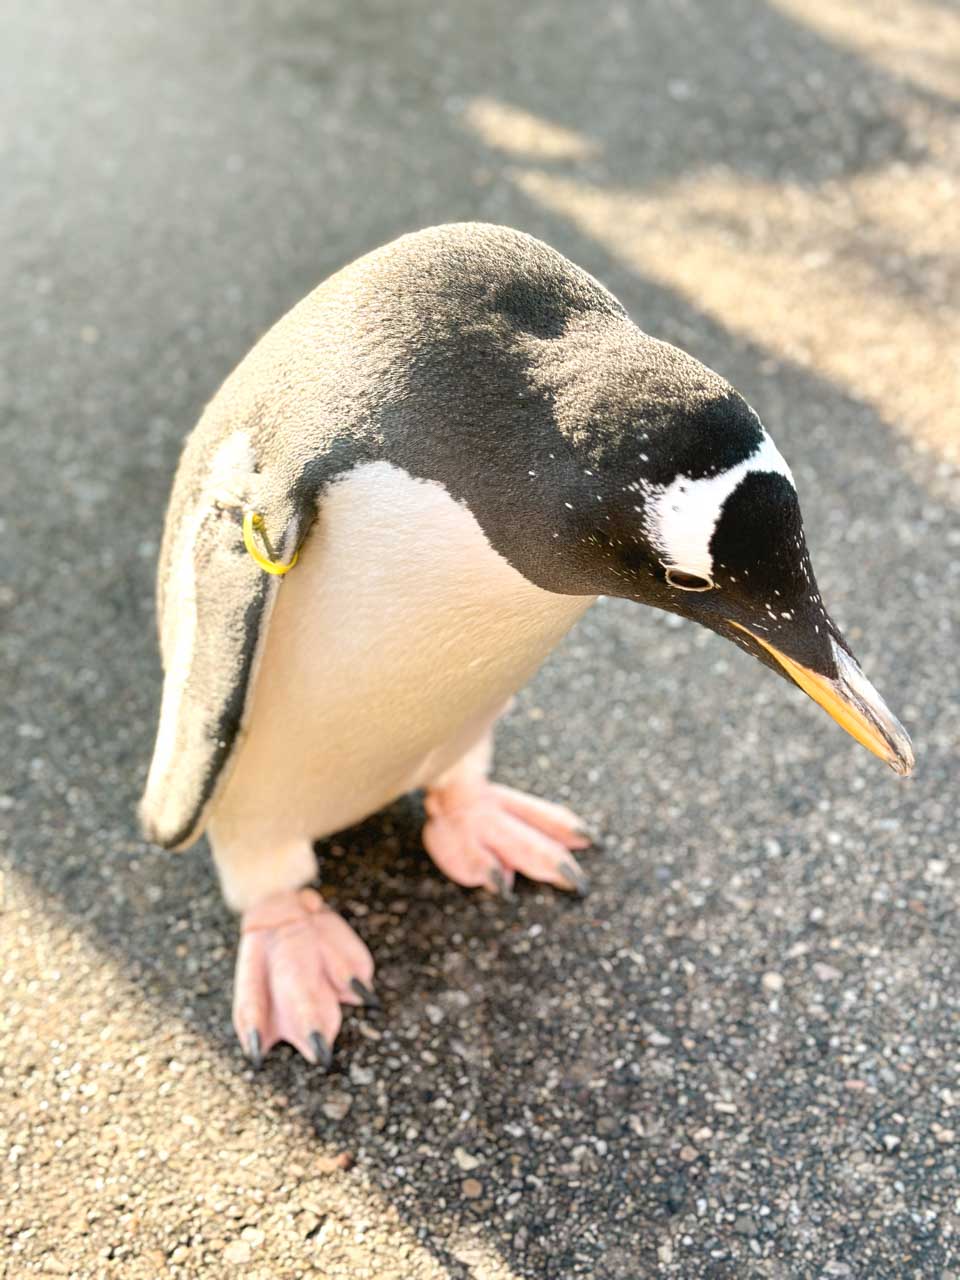 A close-up of a King Penguin with a yellow identification band, standing on a concrete path